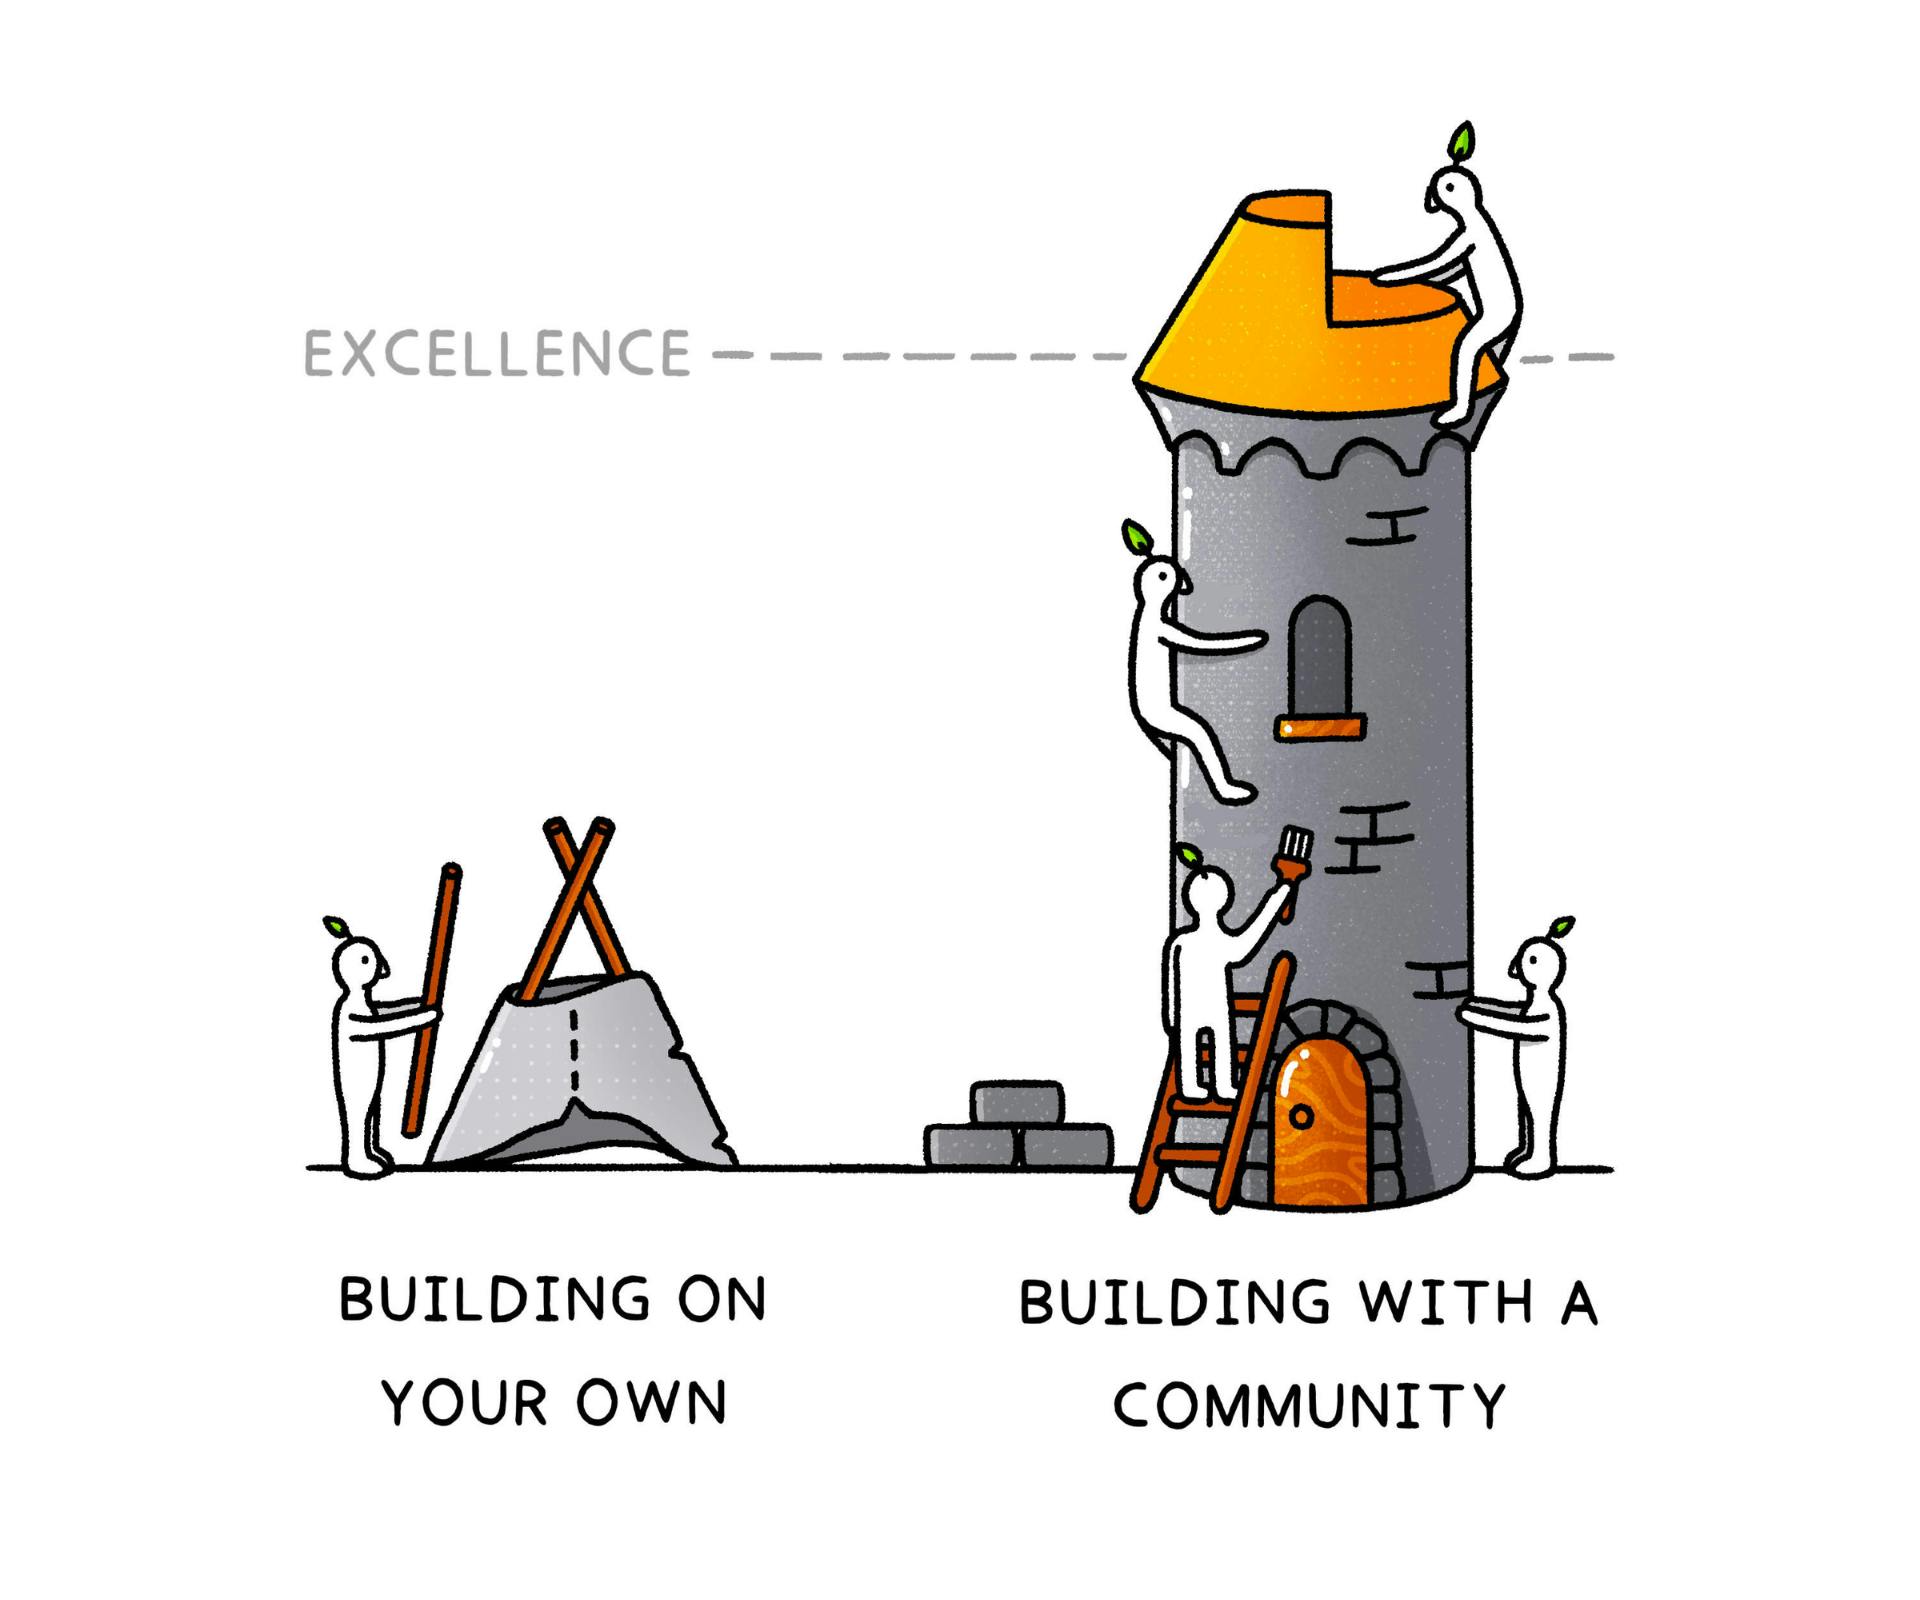 Excellence is building with a community, with illustration